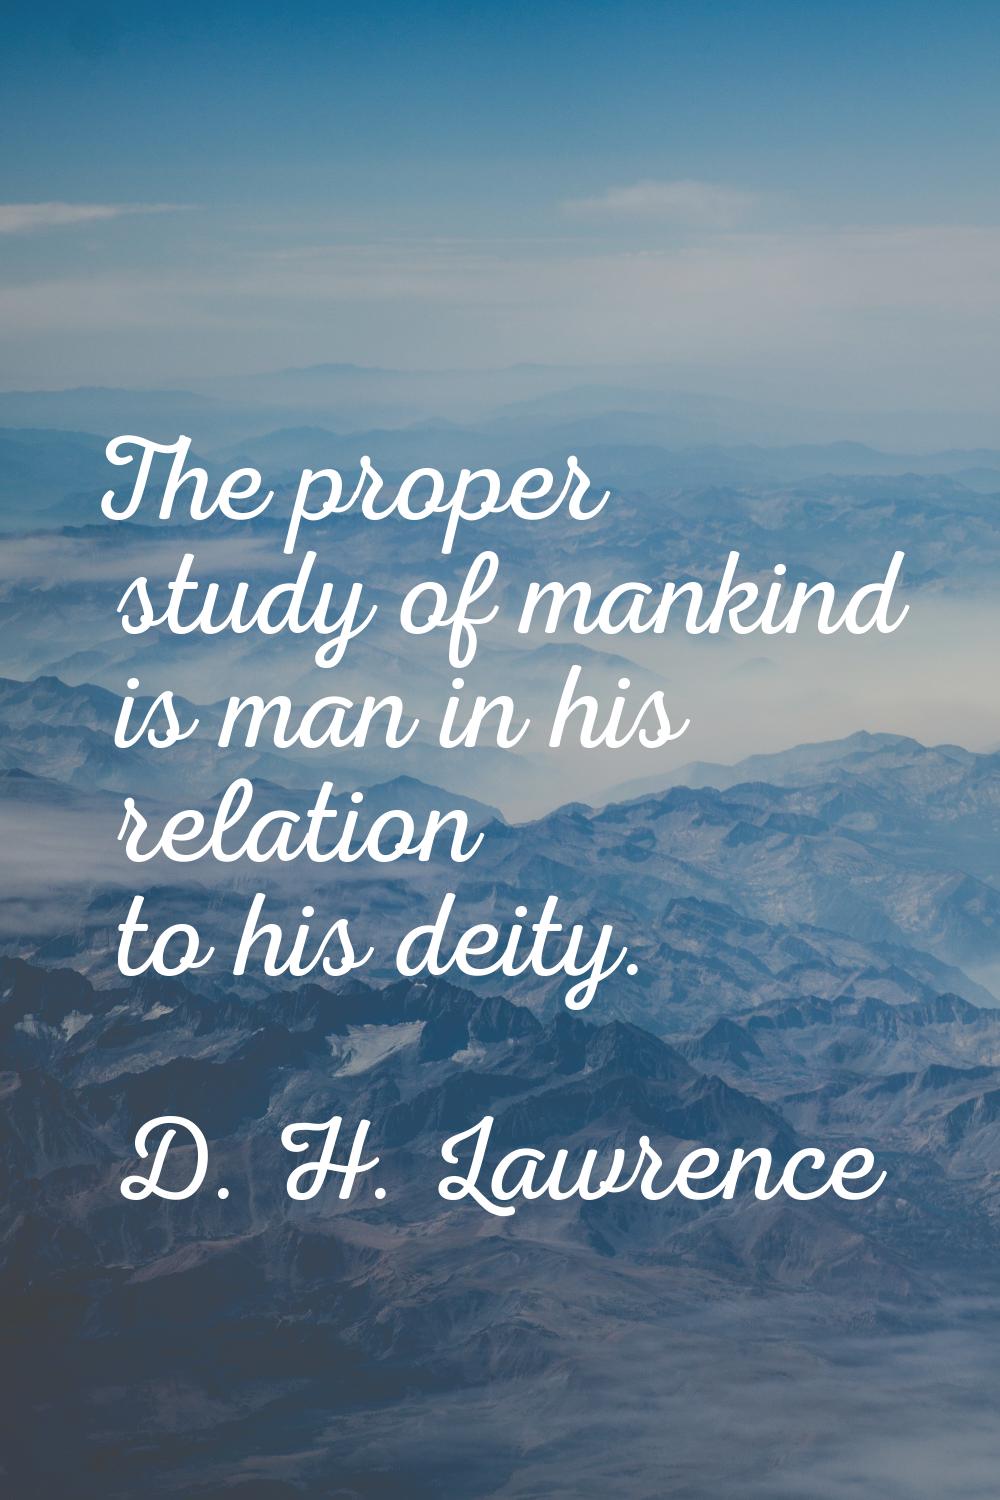 The proper study of mankind is man in his relation to his deity.